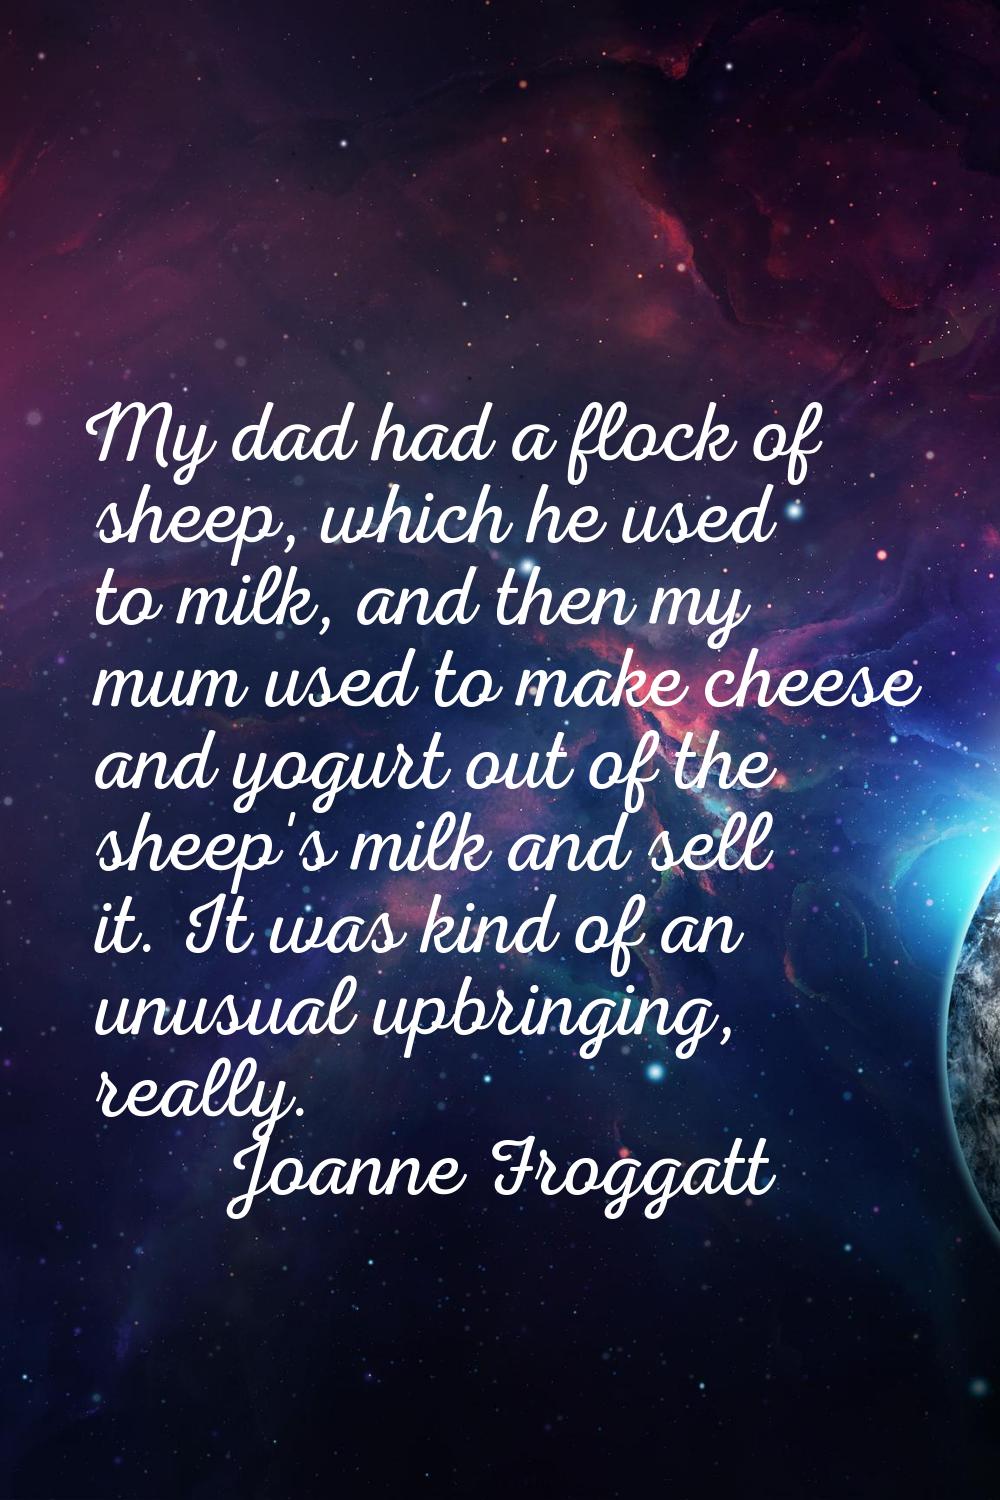 My dad had a flock of sheep, which he used to milk, and then my mum used to make cheese and yogurt 